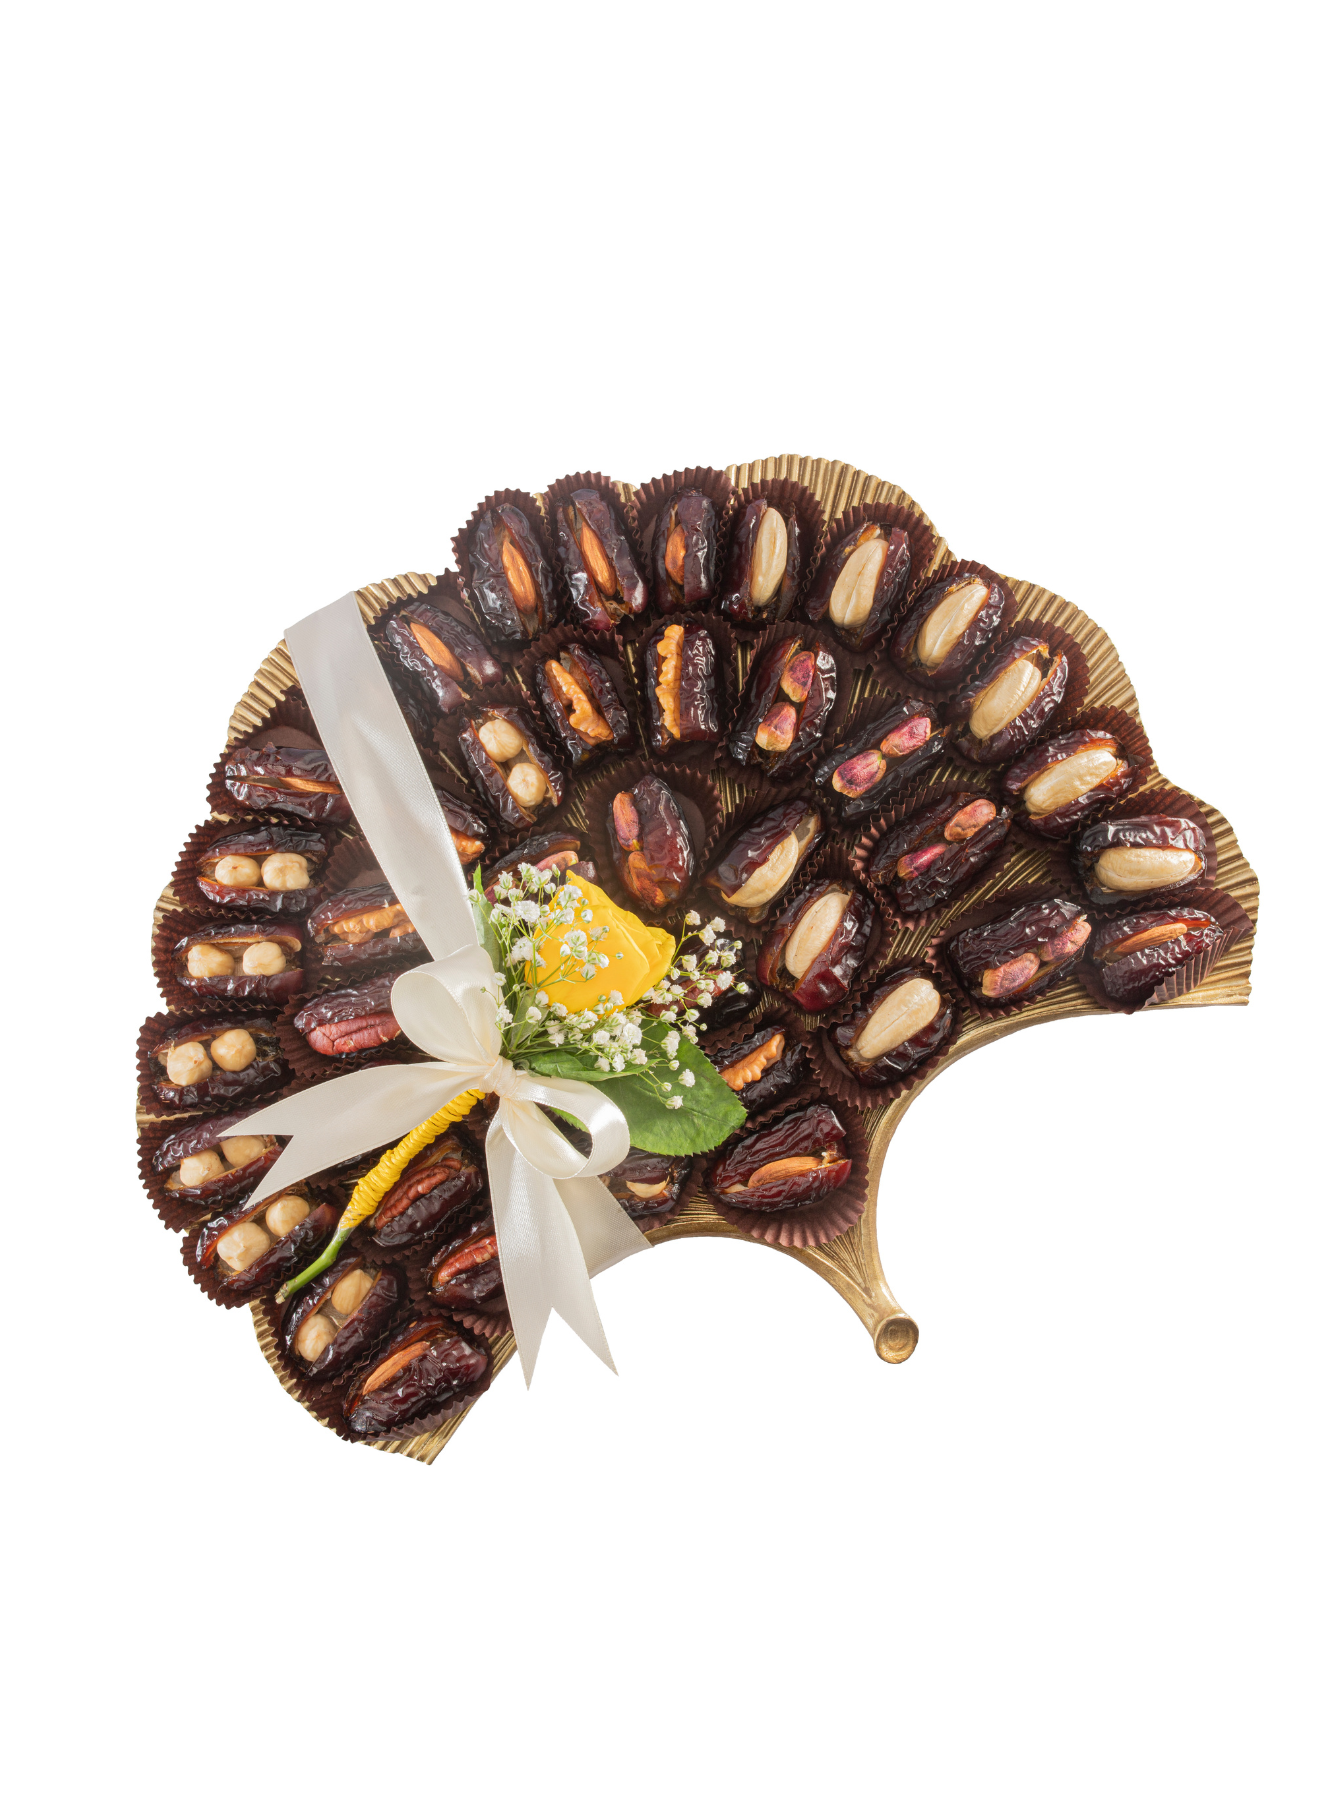 Safawi Dates with Golden Platter with Ribbon (46 Pcs)